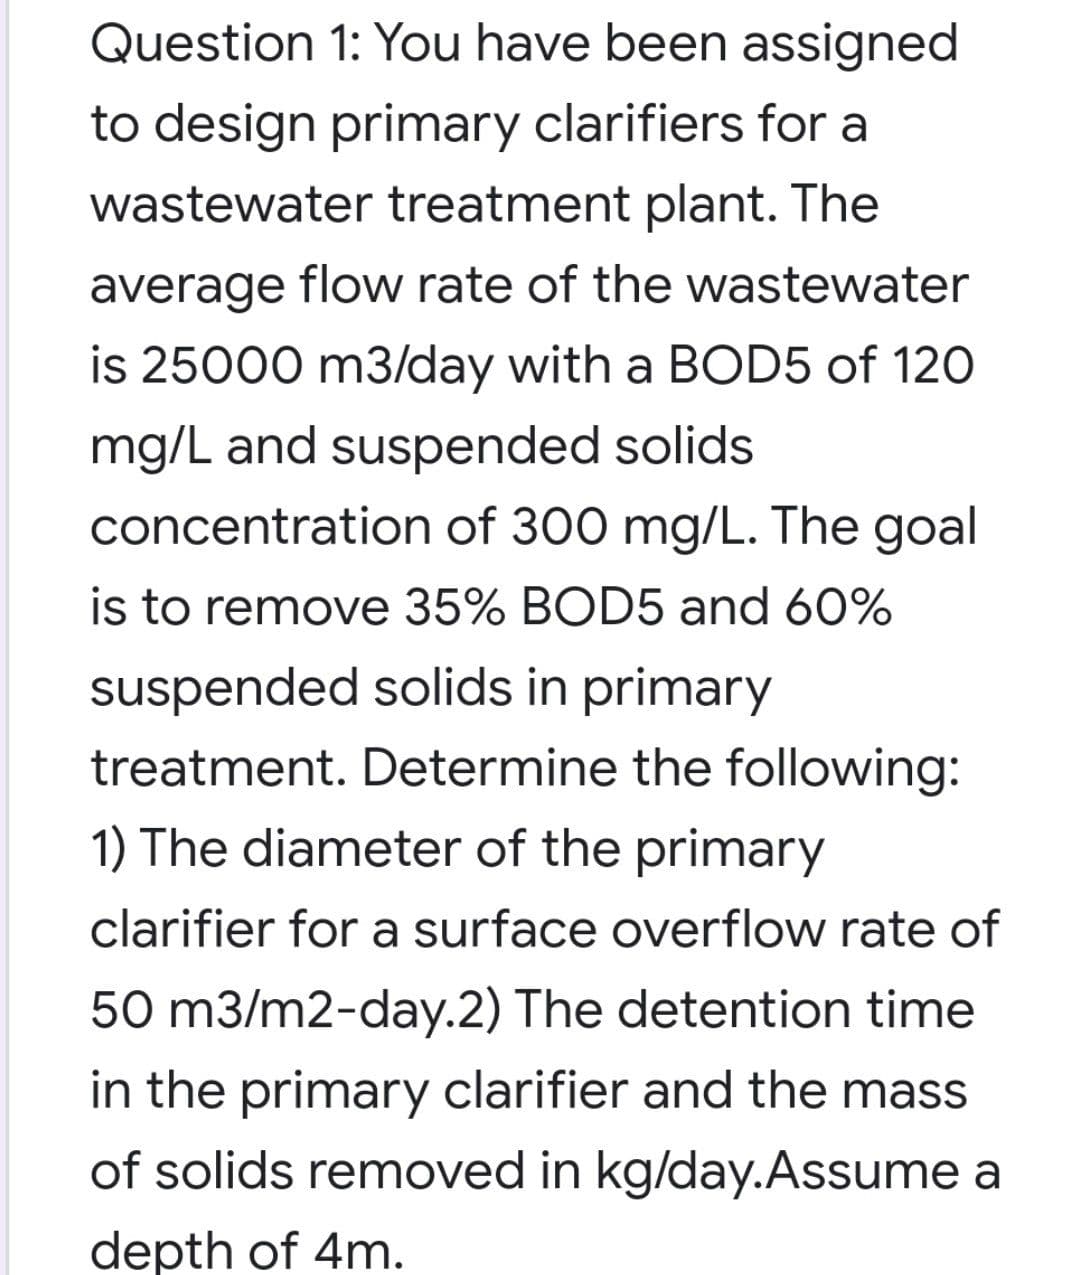 Question 1: You have been assigned
to design primary clarifiers for a
wastewater treatment plant. The
average flow rate of the wastewater
is 25000 m3/day with a BOD5 of 120
mg/L and suspended solids
concentration of 300 mg/L. The goal
is to remove 35% BOD5 and 60%
suspended solids in primary
treatment. Determine the following:
1) The diameter of the primary
clarifier for a surface overflow rate of
50 m3/m2-day.2) The detention time
in the primary clarifier and the mass
of solids removed in kg/day.Assume a
depth of 4m.
